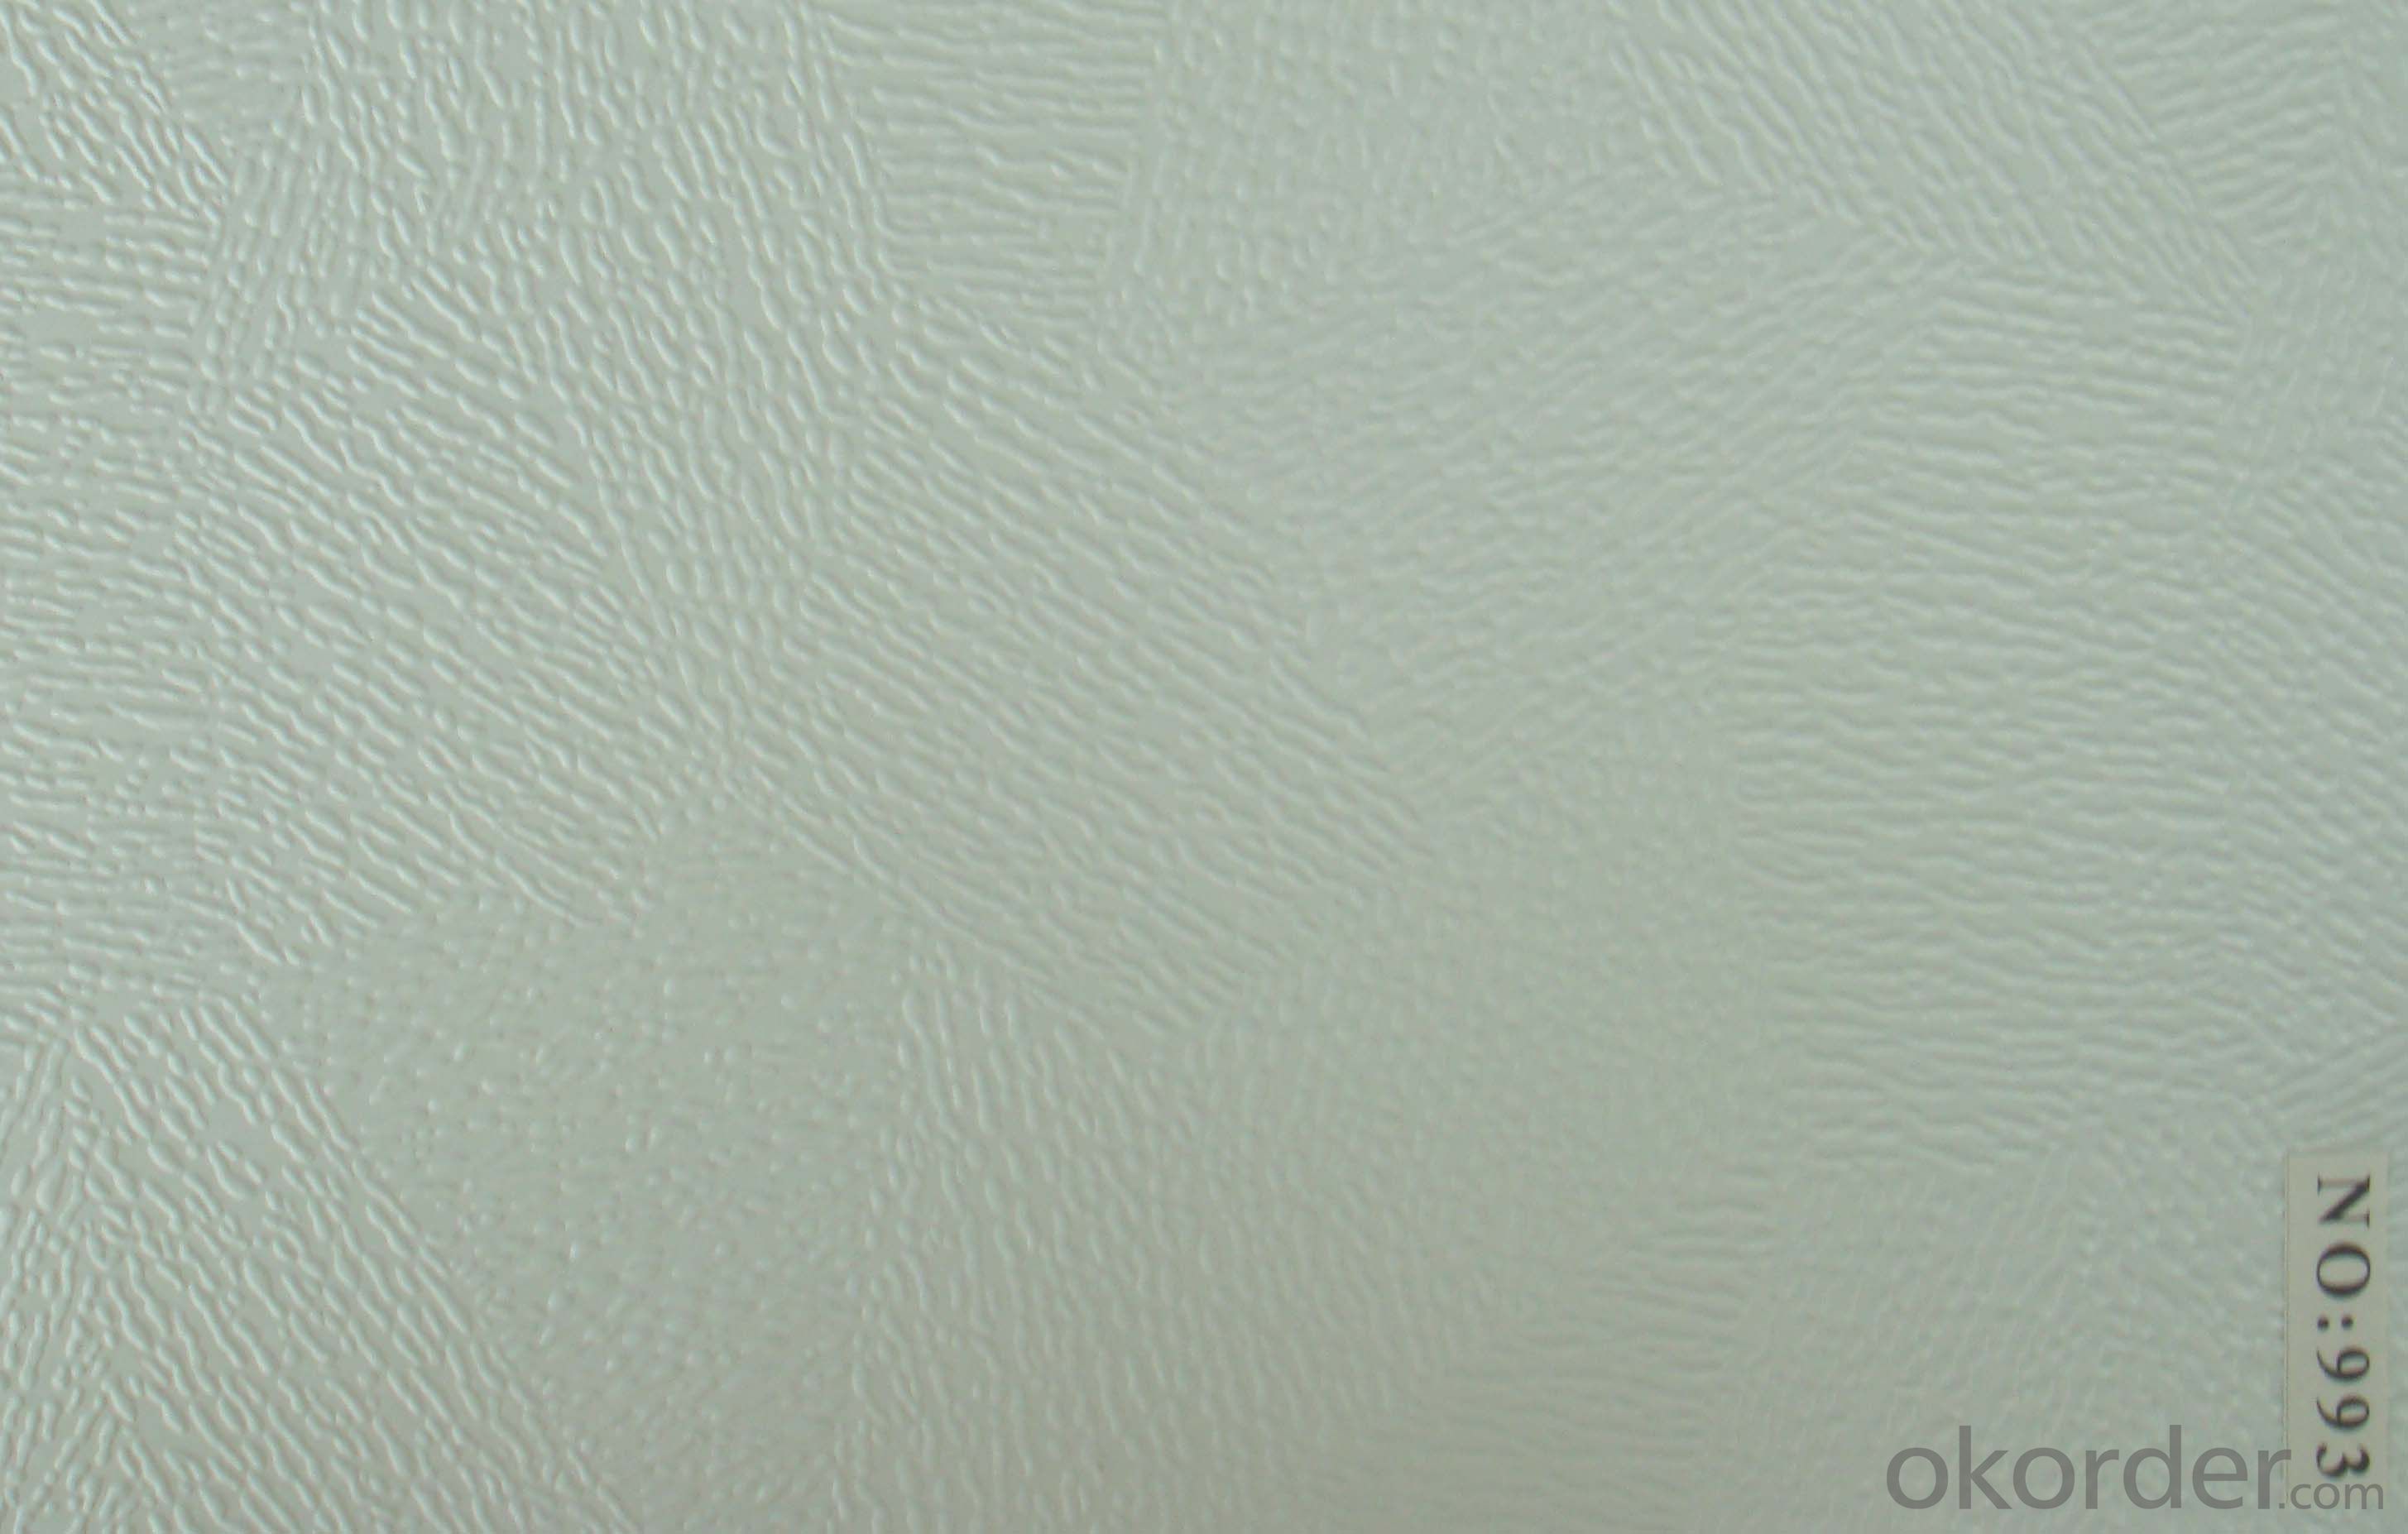 Gypsum Ceiling with Texture 993